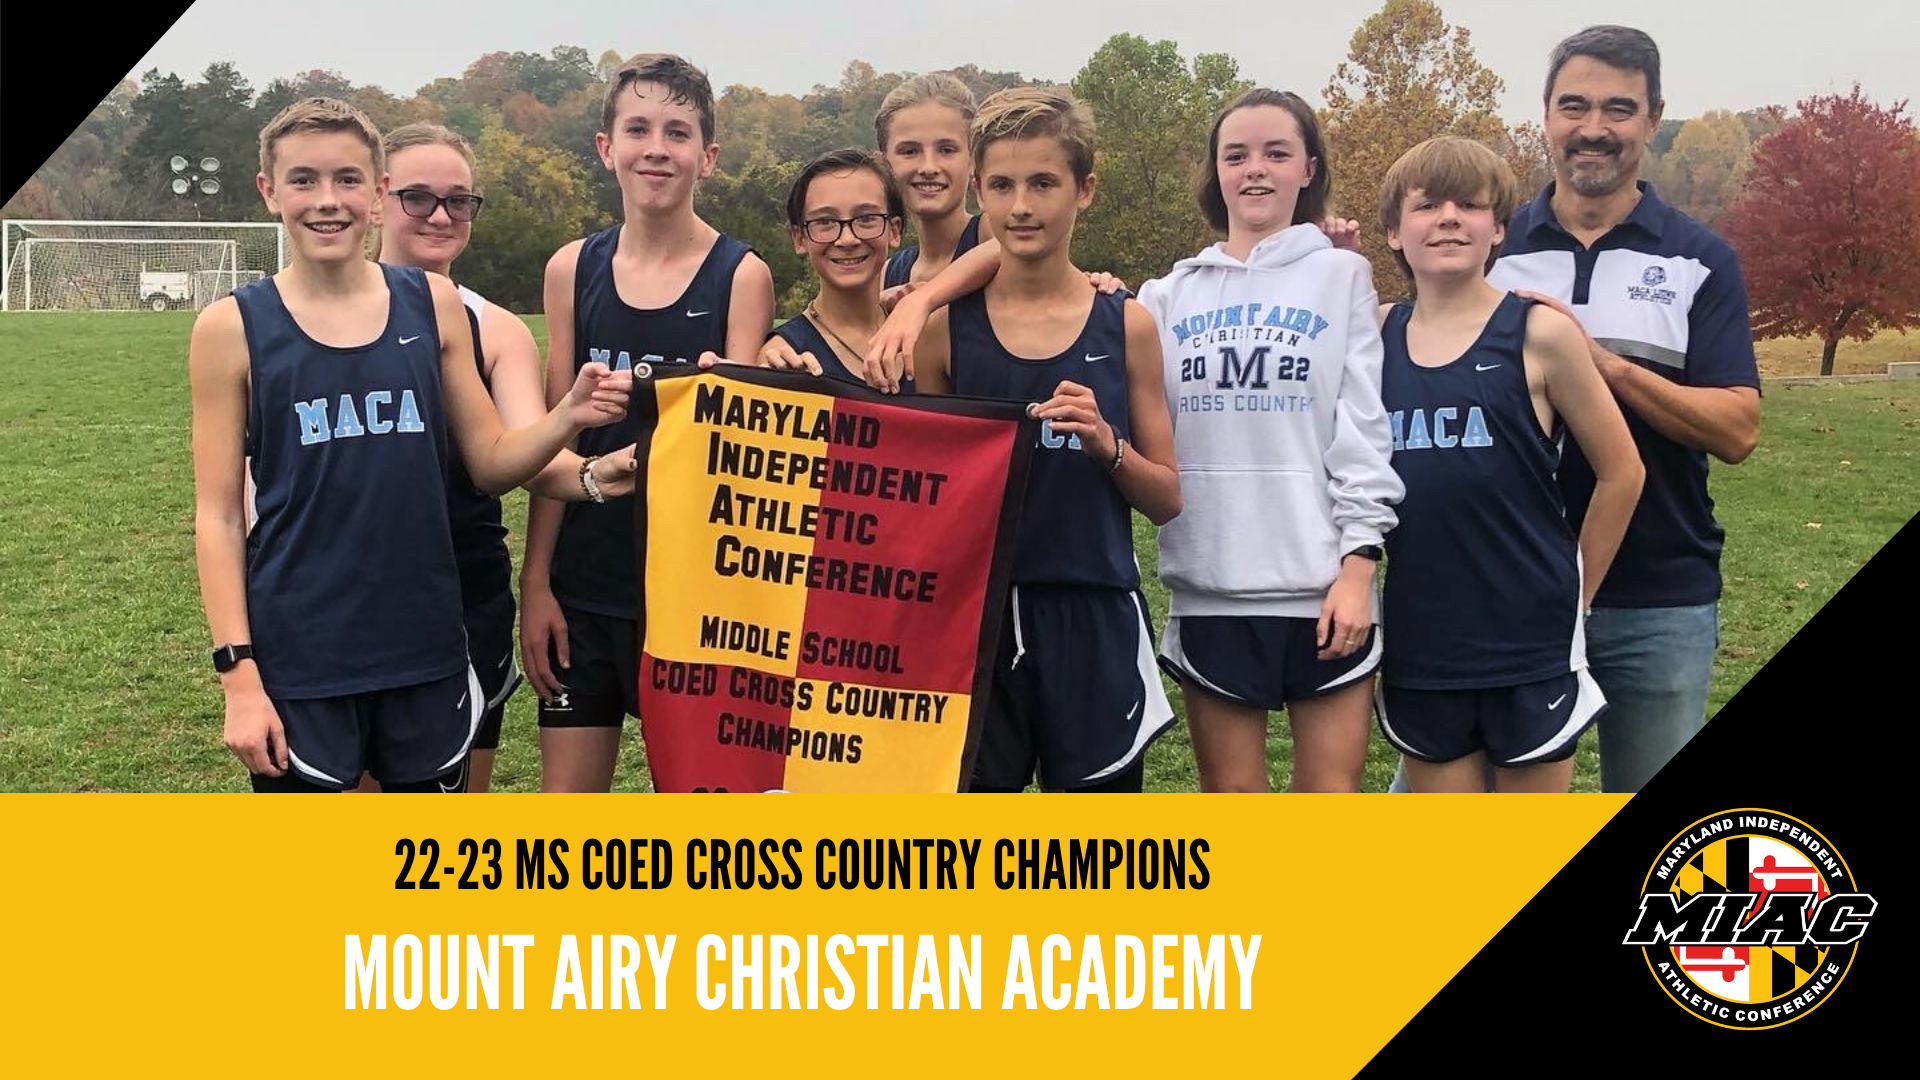 2022 MS Cross Country Champions - Mount Airy Christian Academy